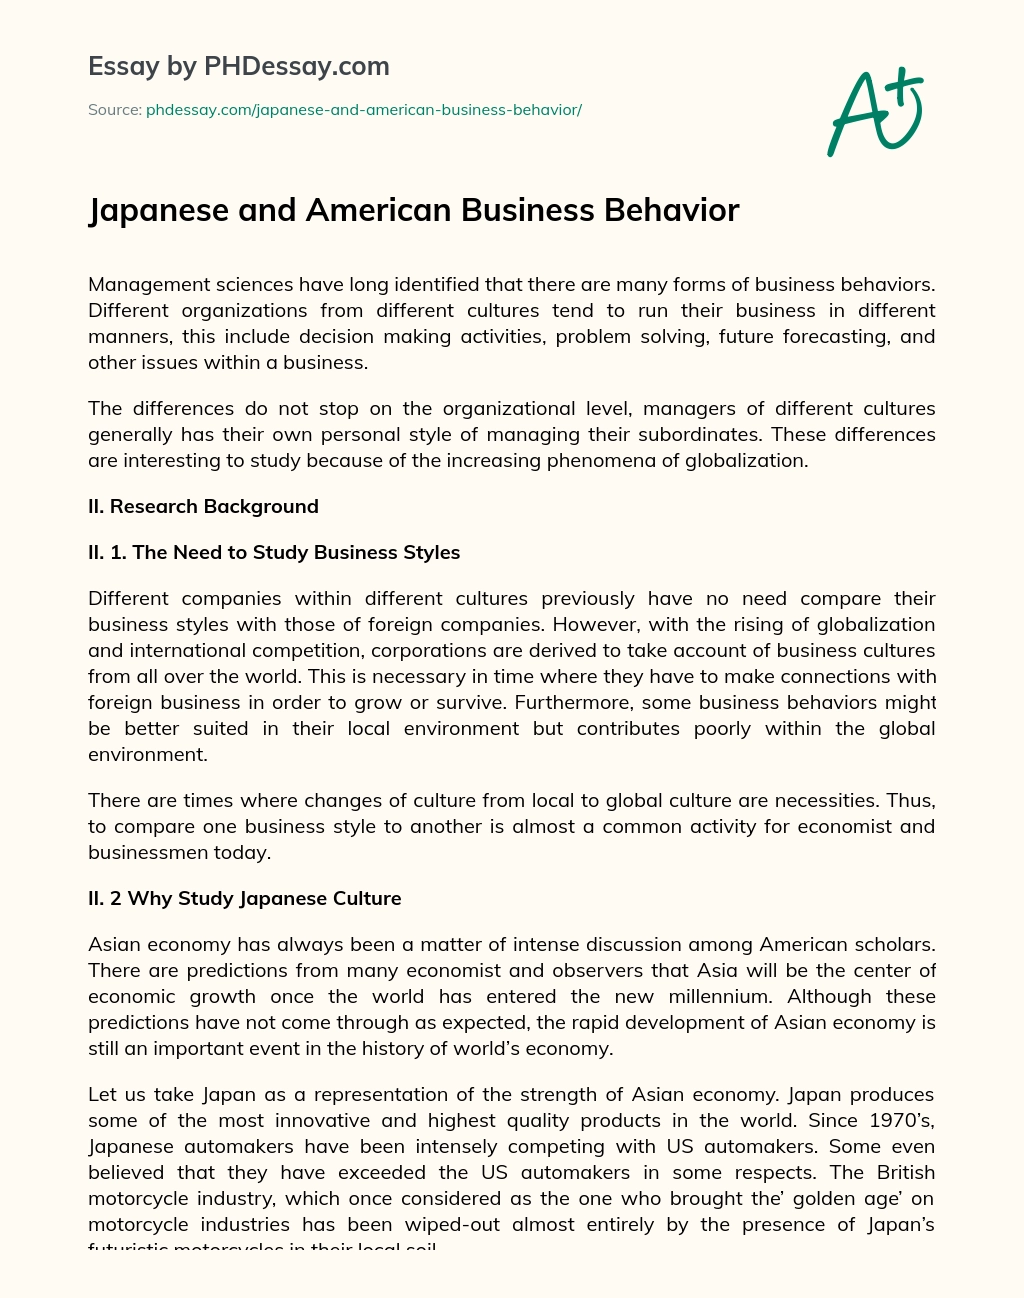 Japanese and American Business Behavior essay